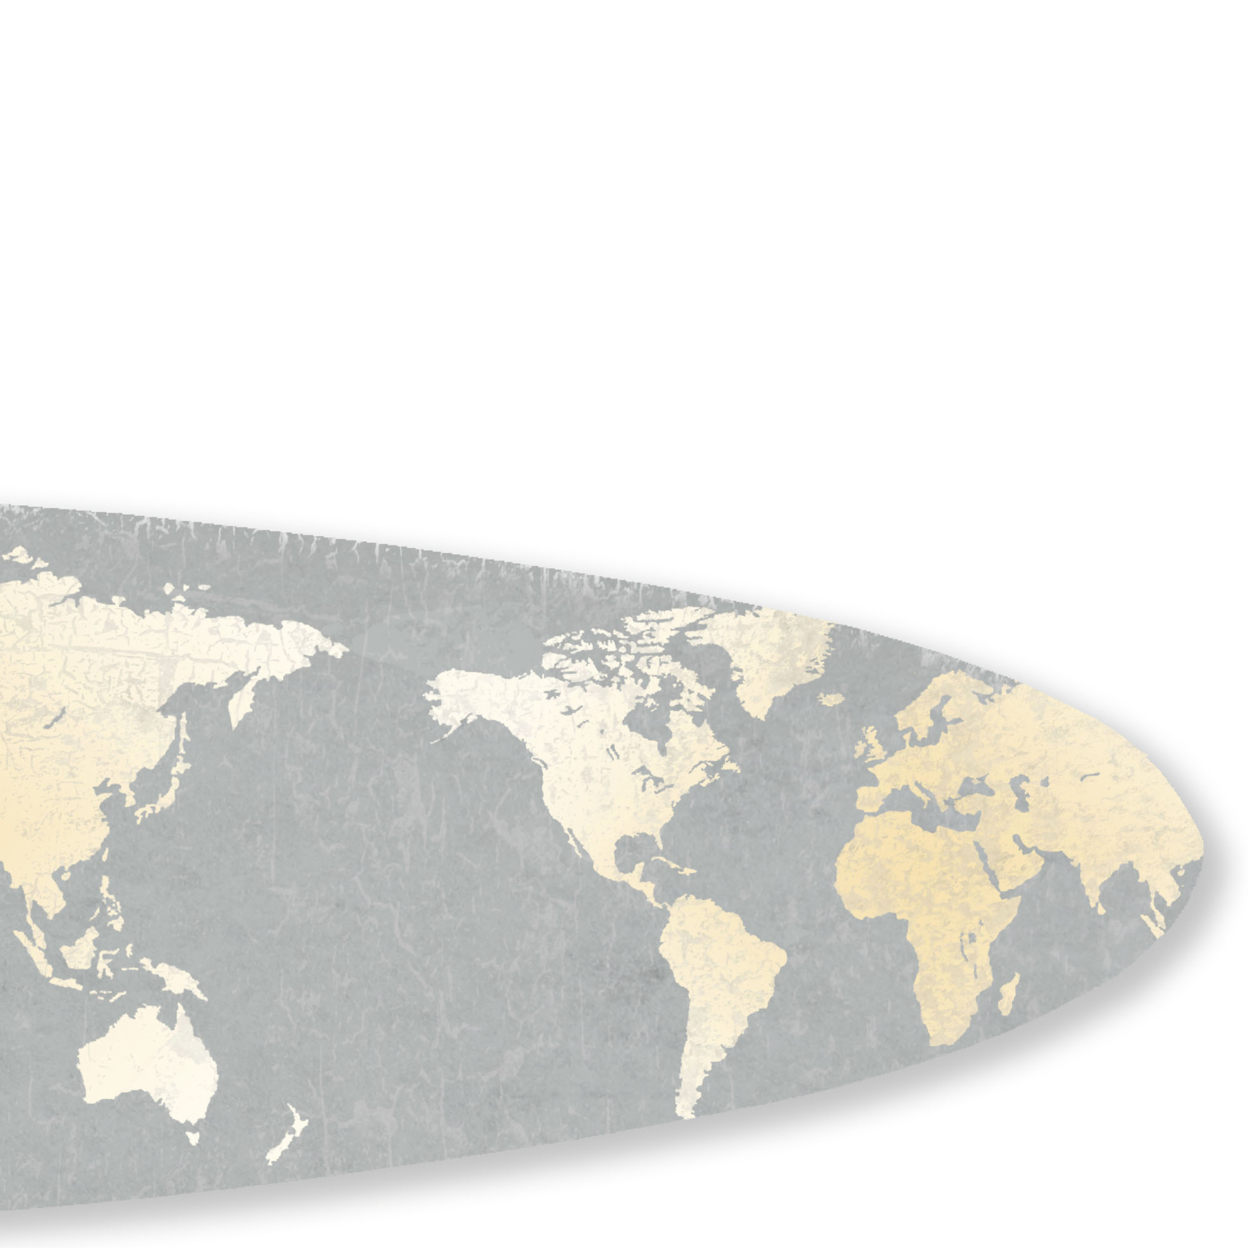 Wooden Surfboard Wall Art With World Map Print, Gray And White- Saltoro Sherpi